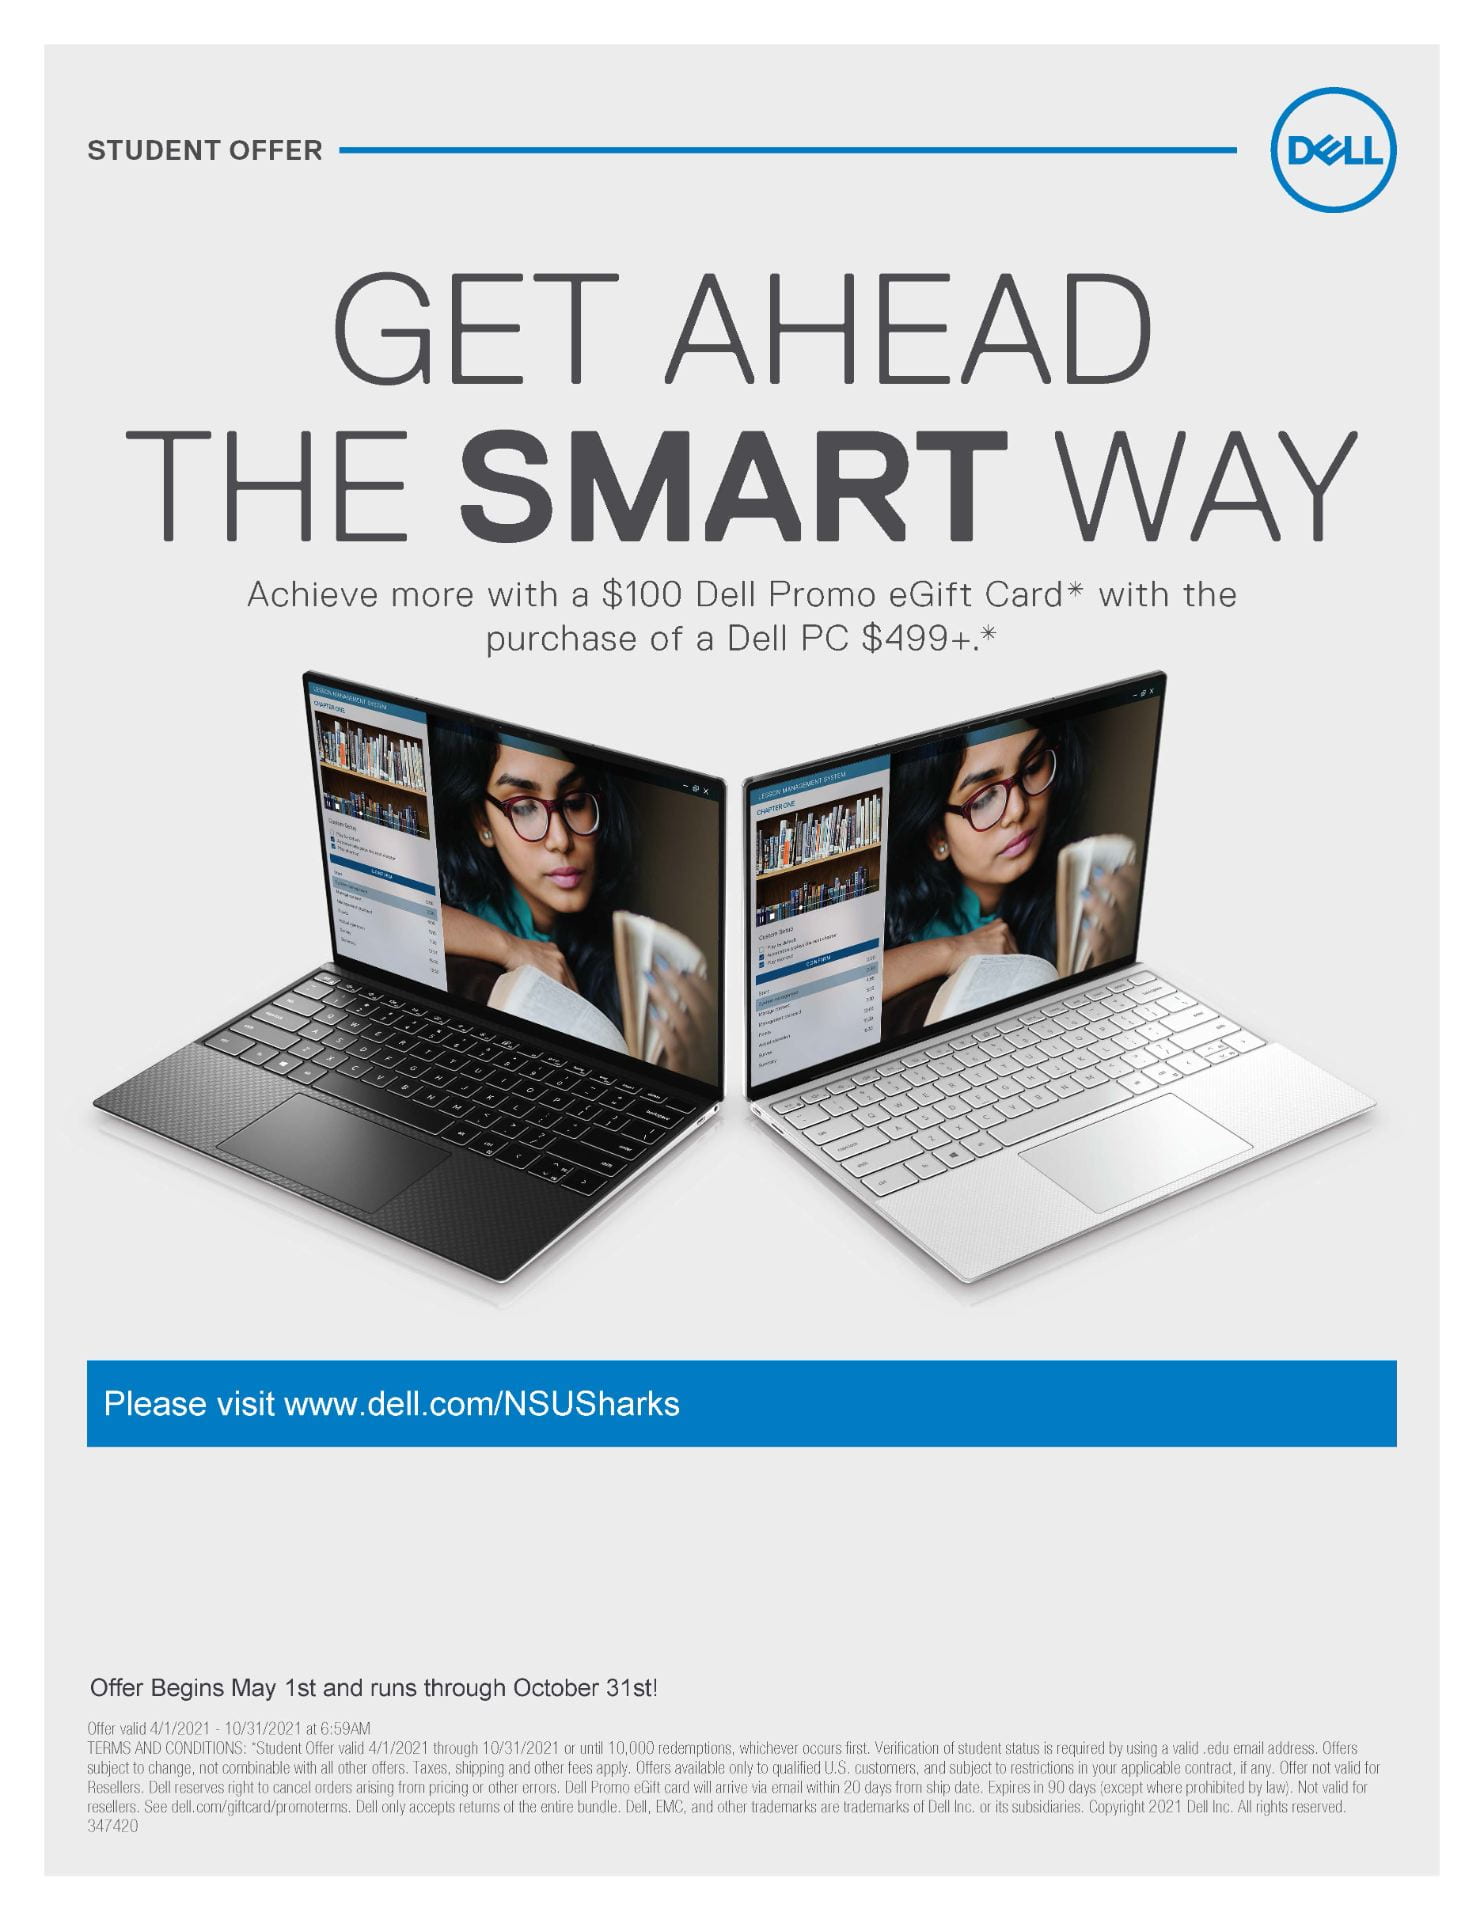 Dell Student Offer Get Ahead The Smart Way NSU SharkFINS